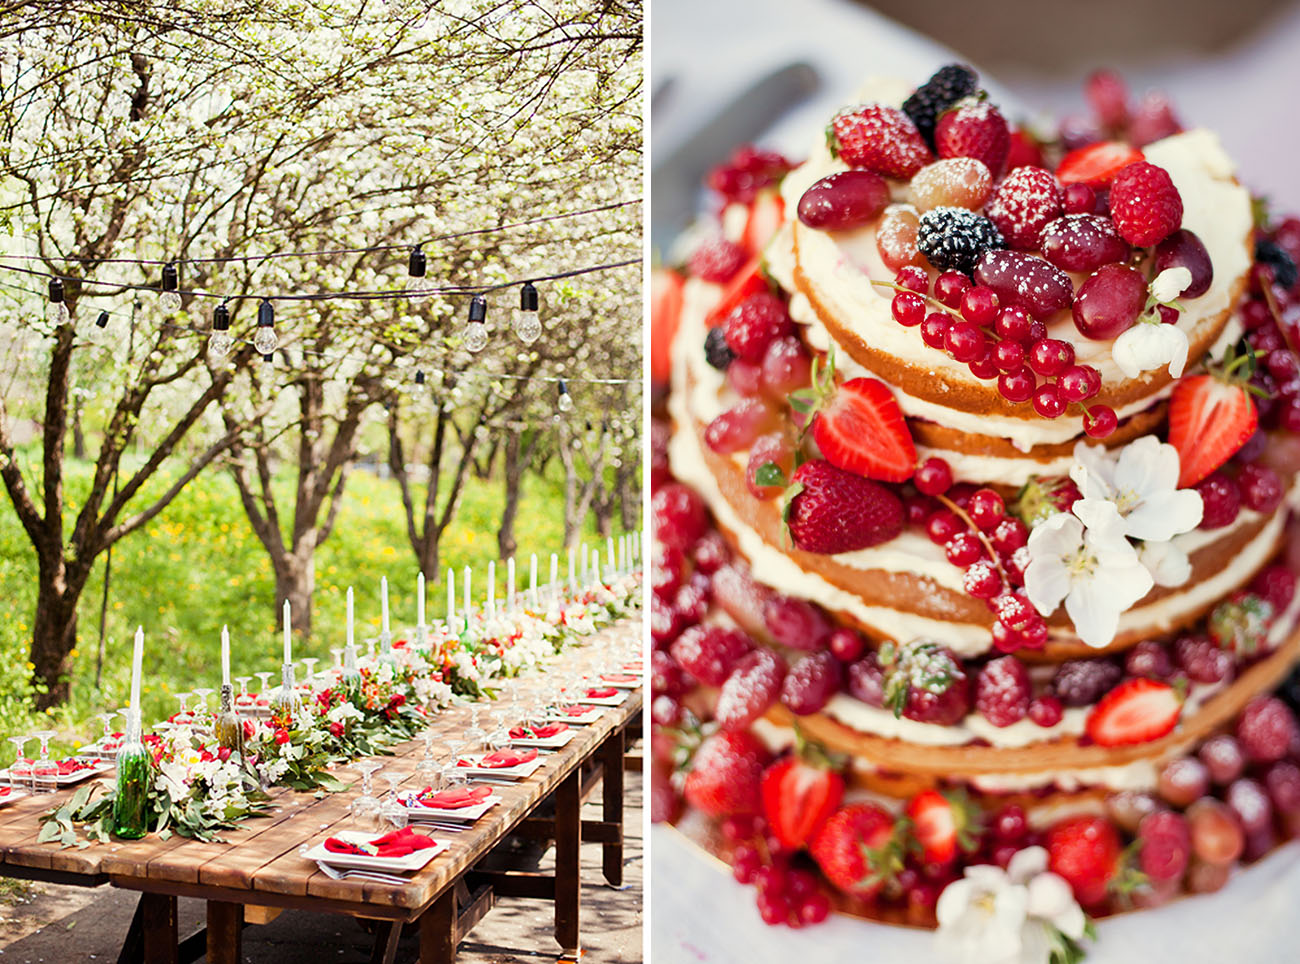 Look at this naked cake topped with fresh berries, isn't it amazing